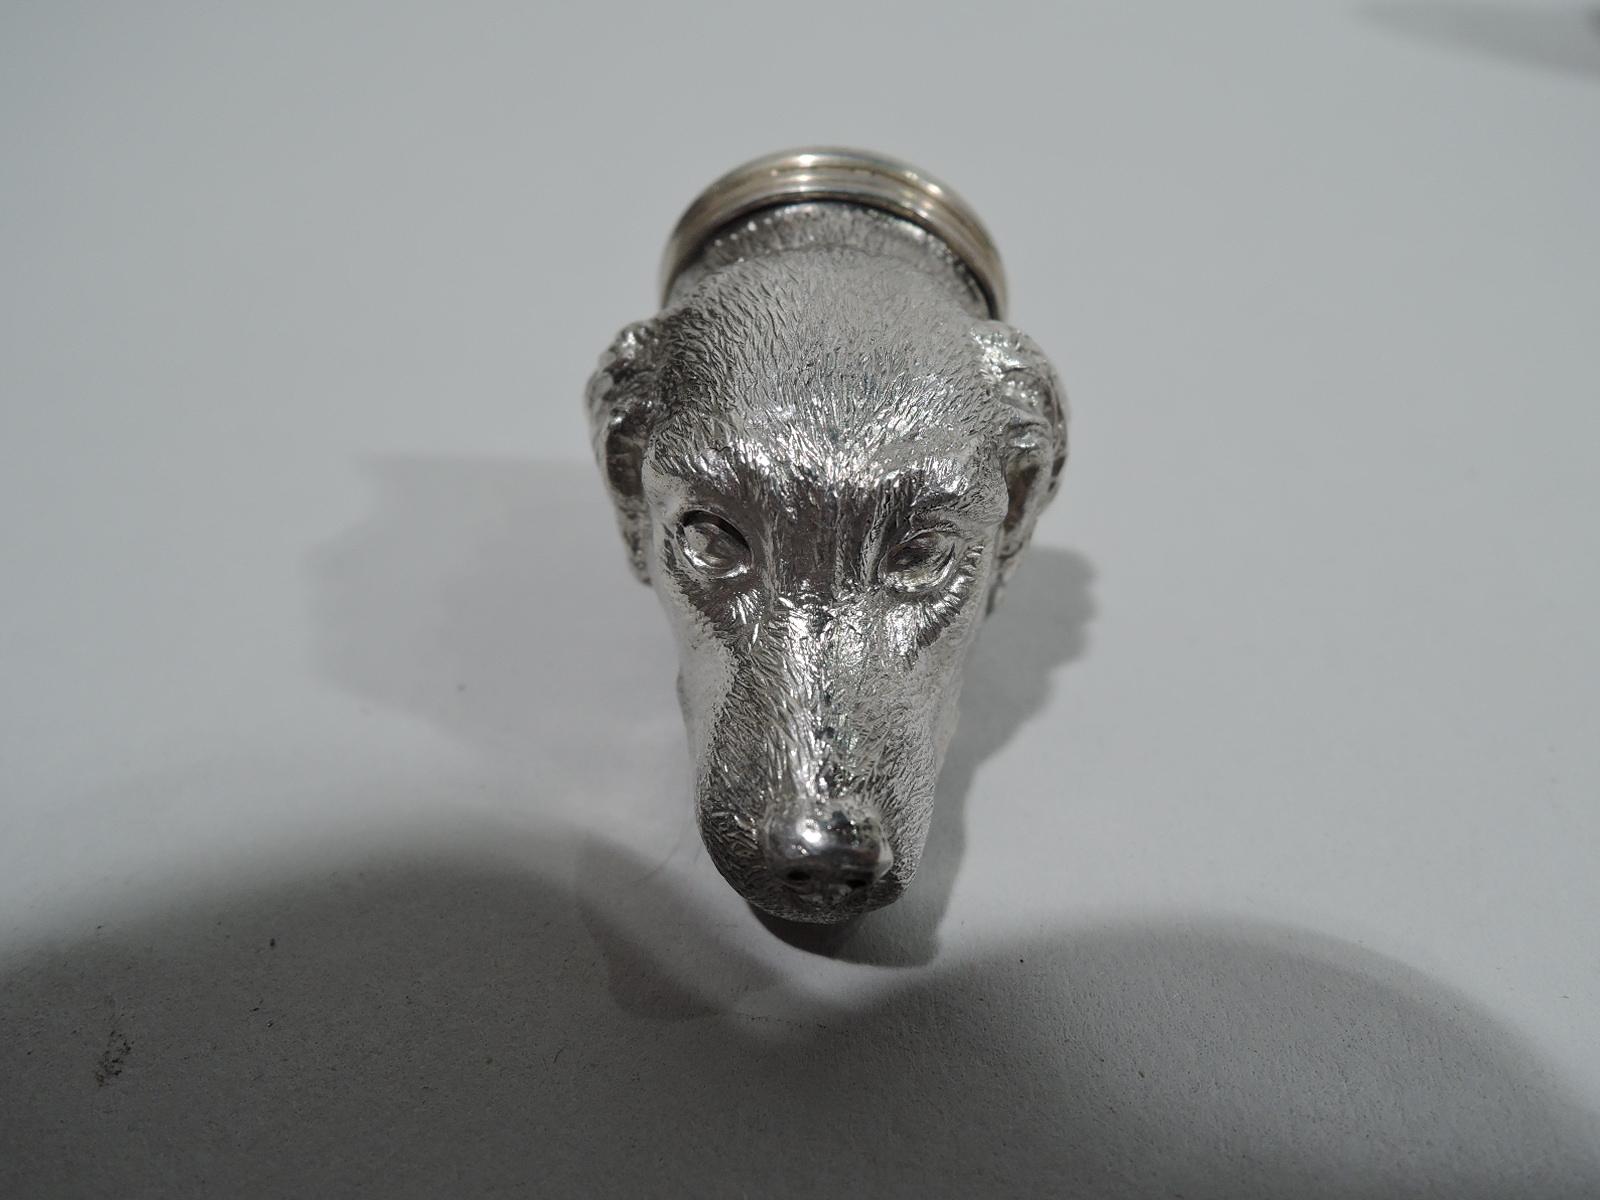 English sterling silver figural pillbox, 1972. Cast dog head with floppy ears and alert nose. A sweet retriever with more feel-better to be kept in the gilt interior. Hinged cover closes securely. English marks include Tiffany stamp. Weight: 1 troy